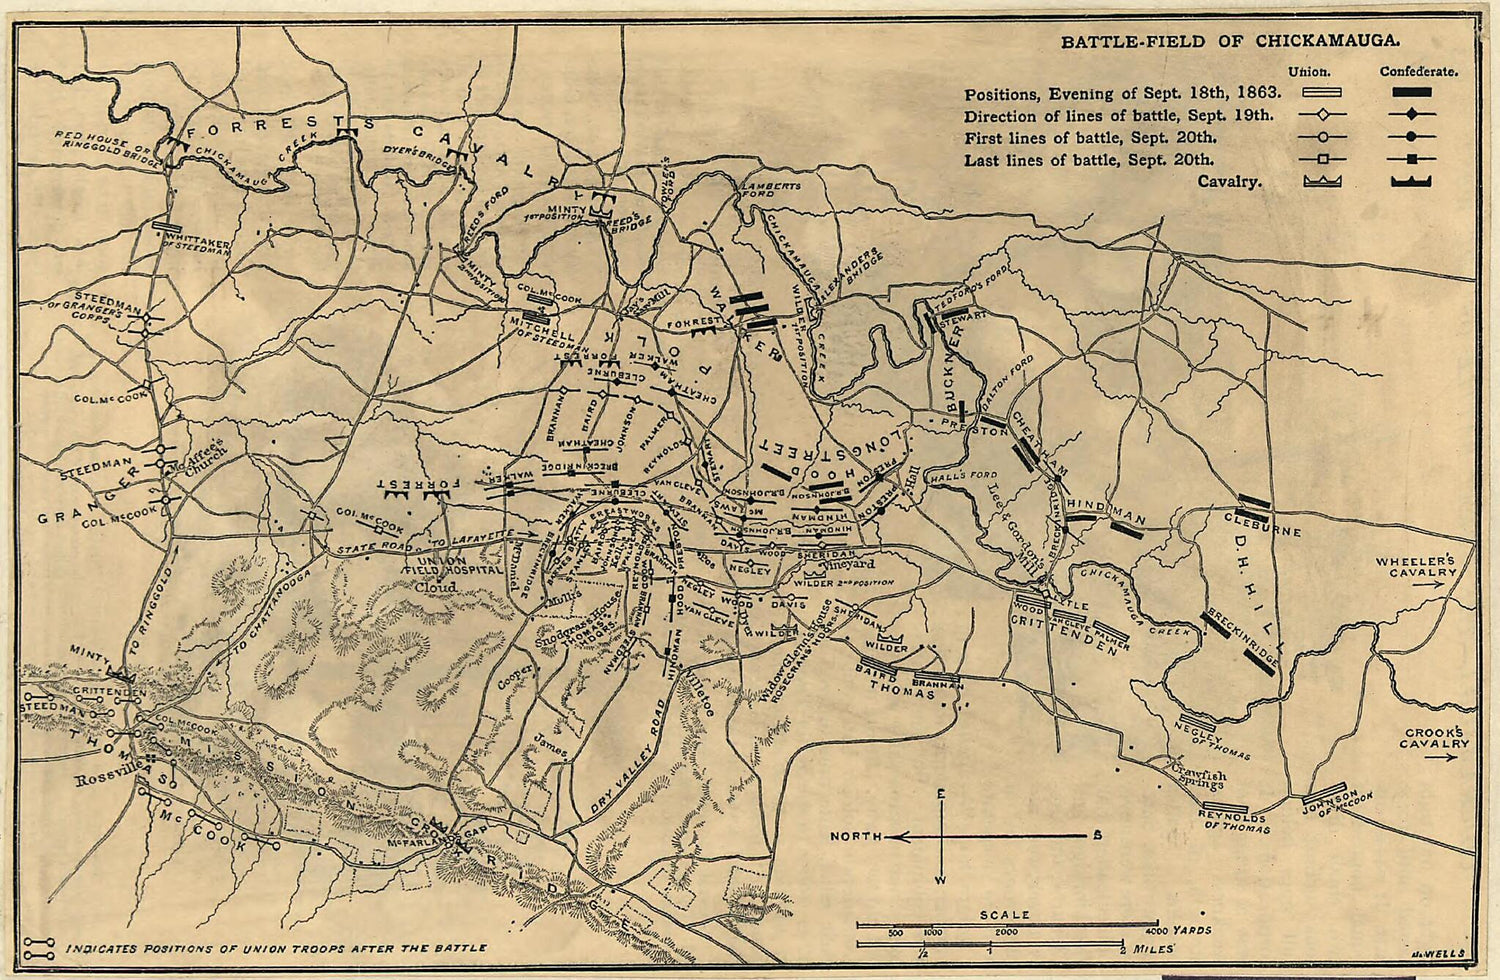 This old map of Field of Chickamauga. Sept 18-20, 1863 from 1887 was created by Jacob Wells in 1887